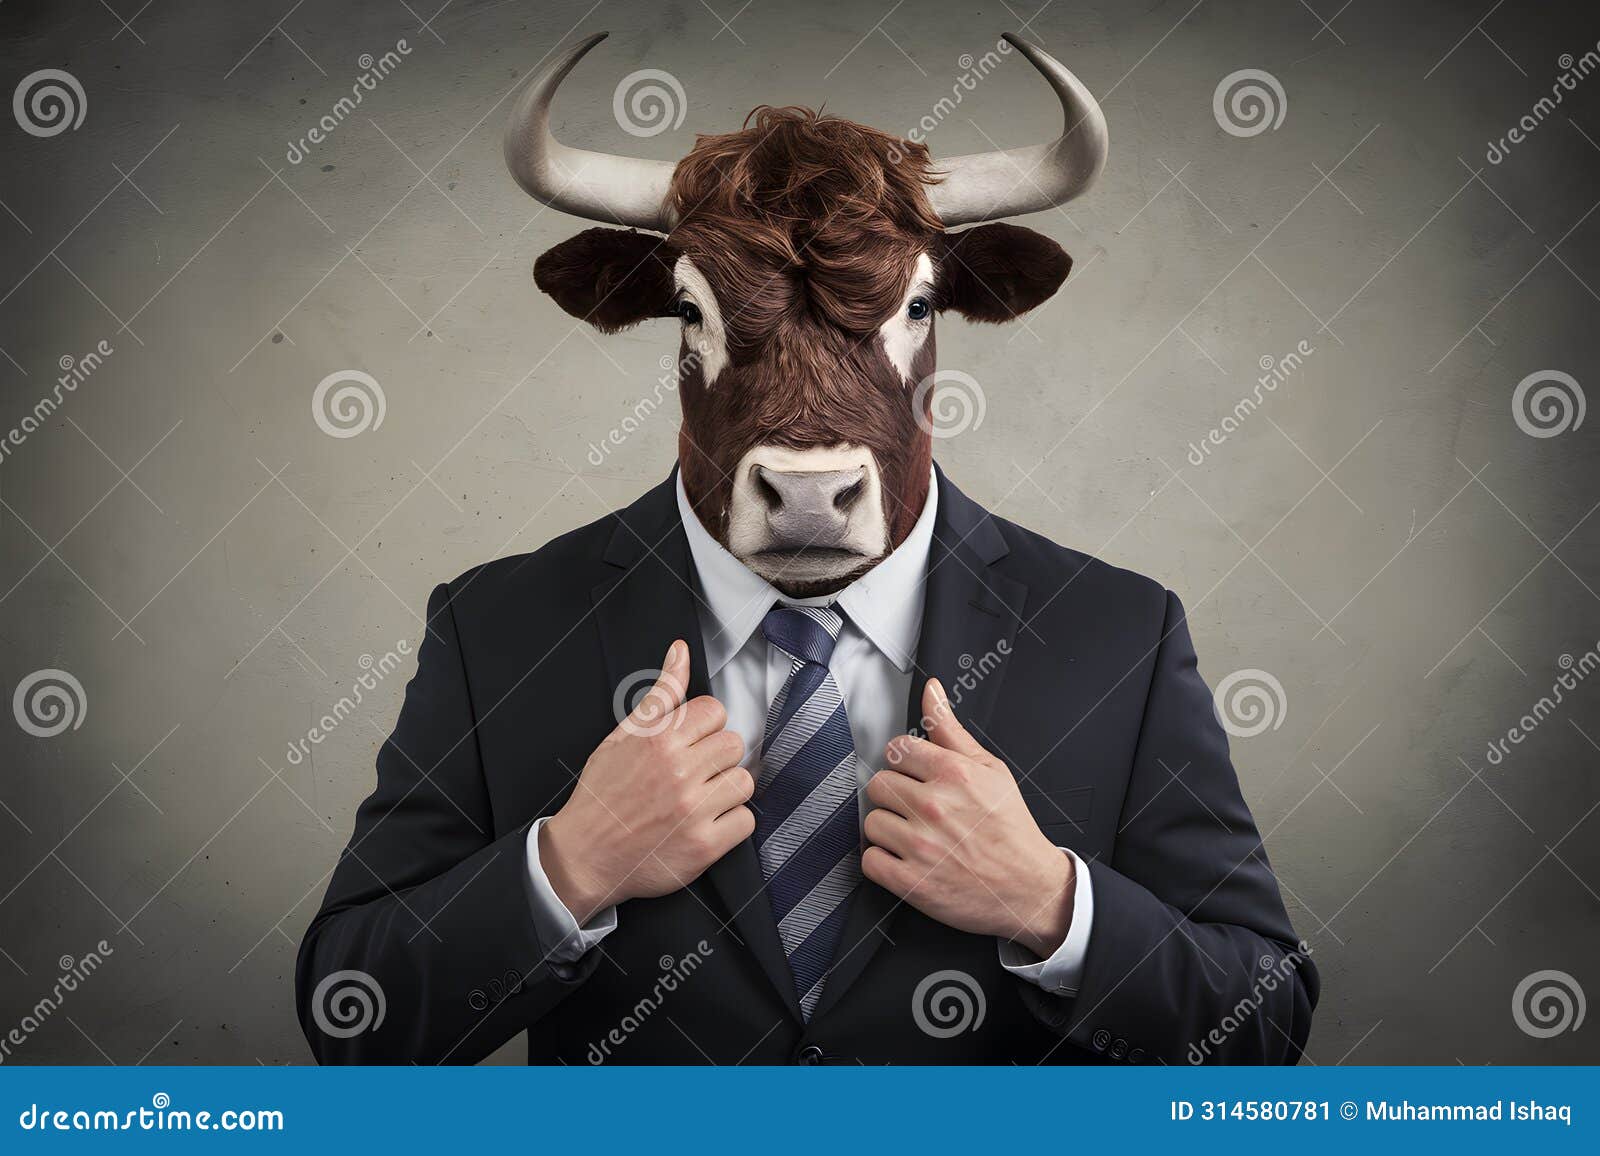 professional bull in business suit, embodiment of financial prowess